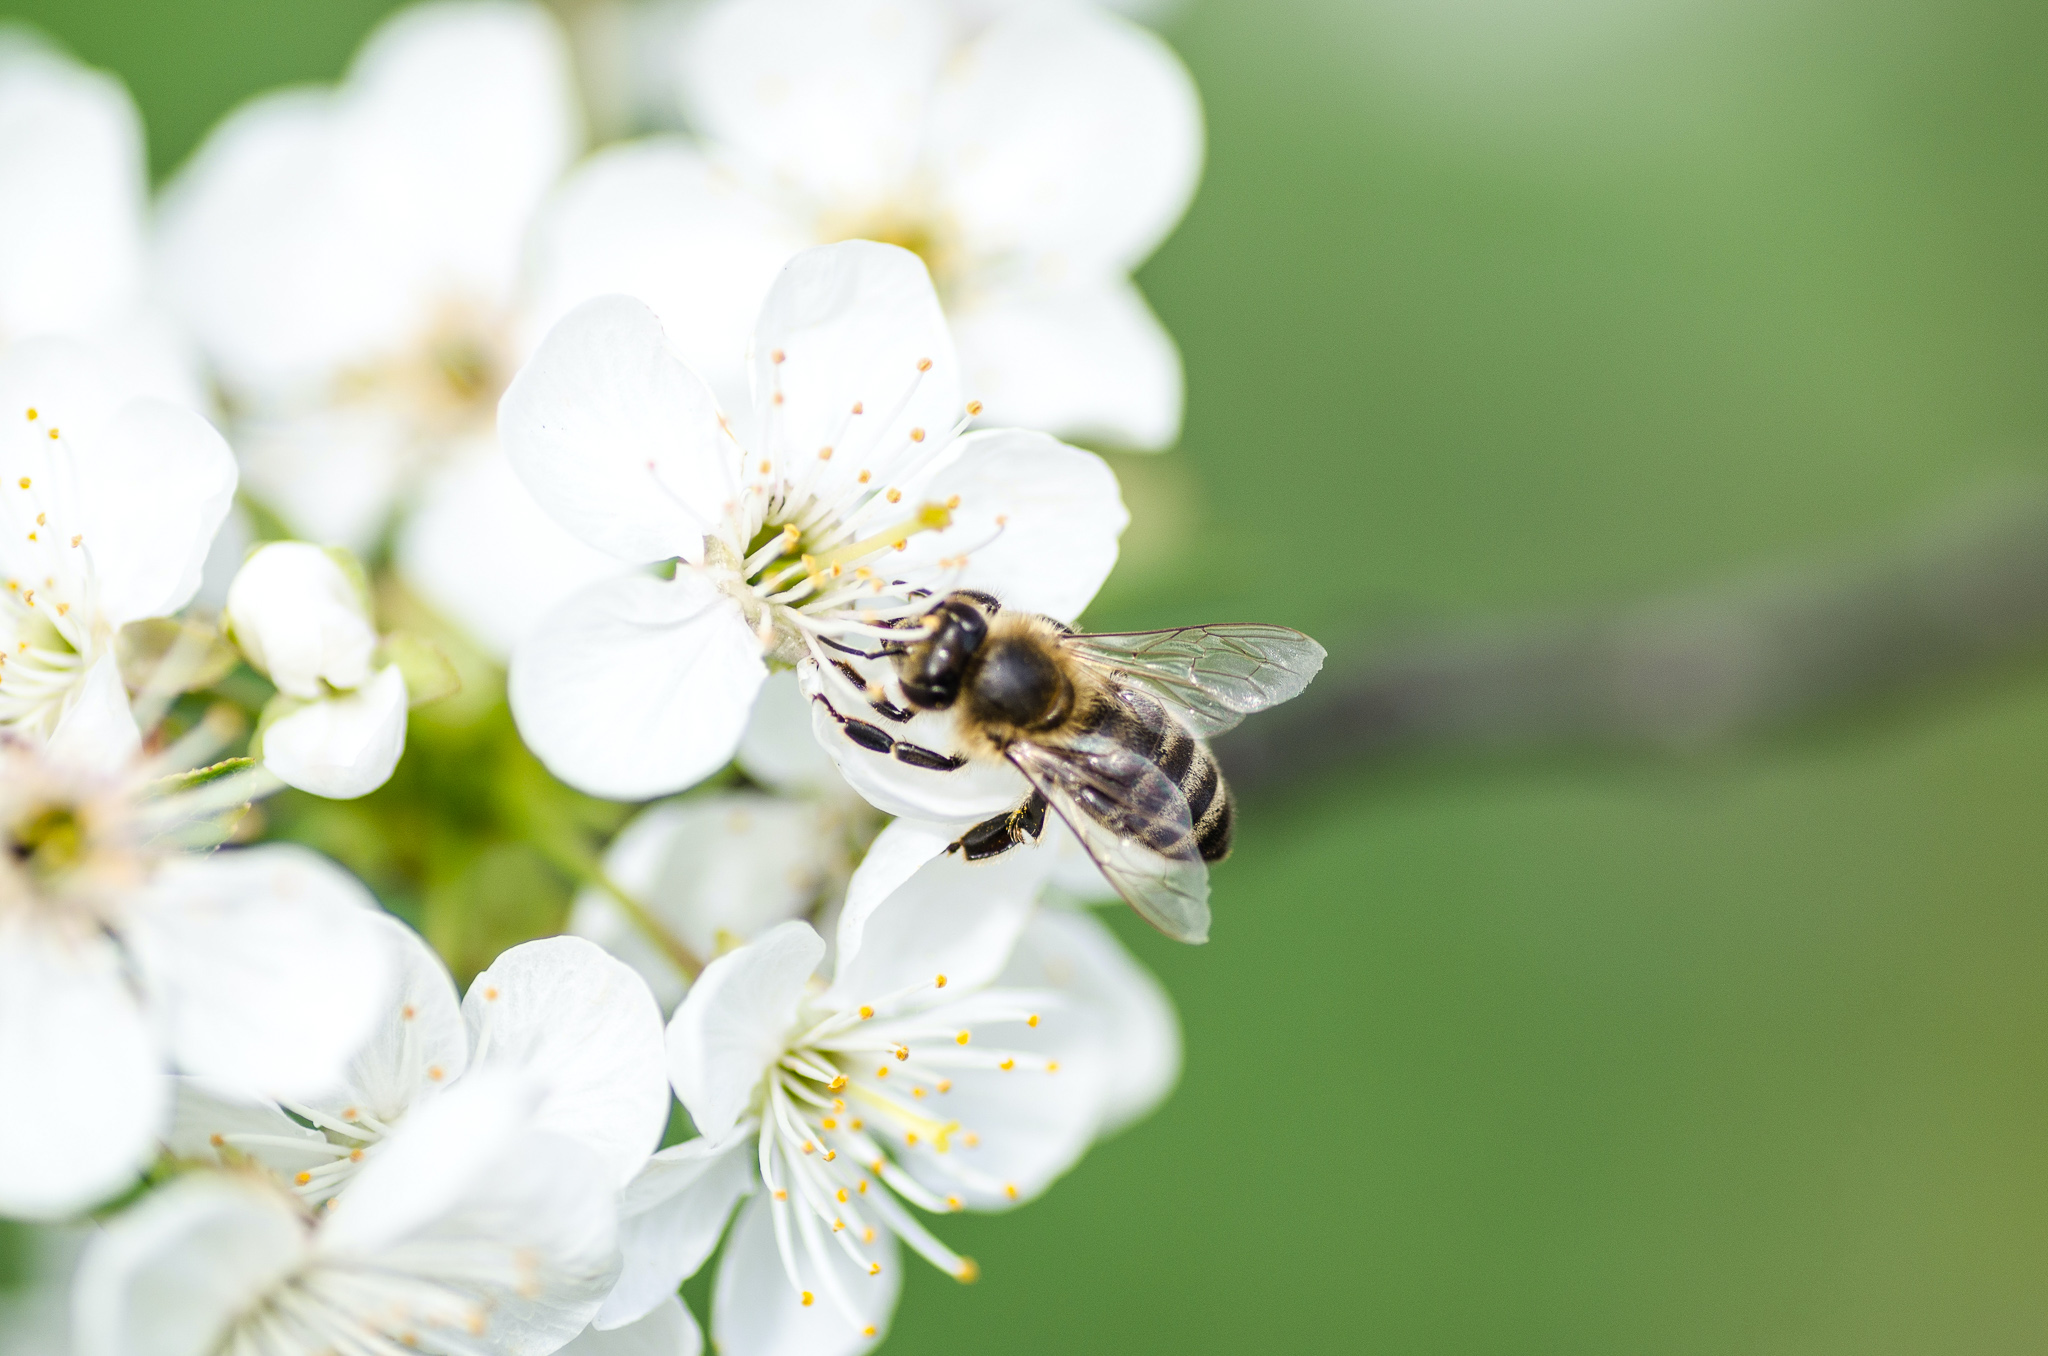 A bee sitting on a white flower bloom during pollination.